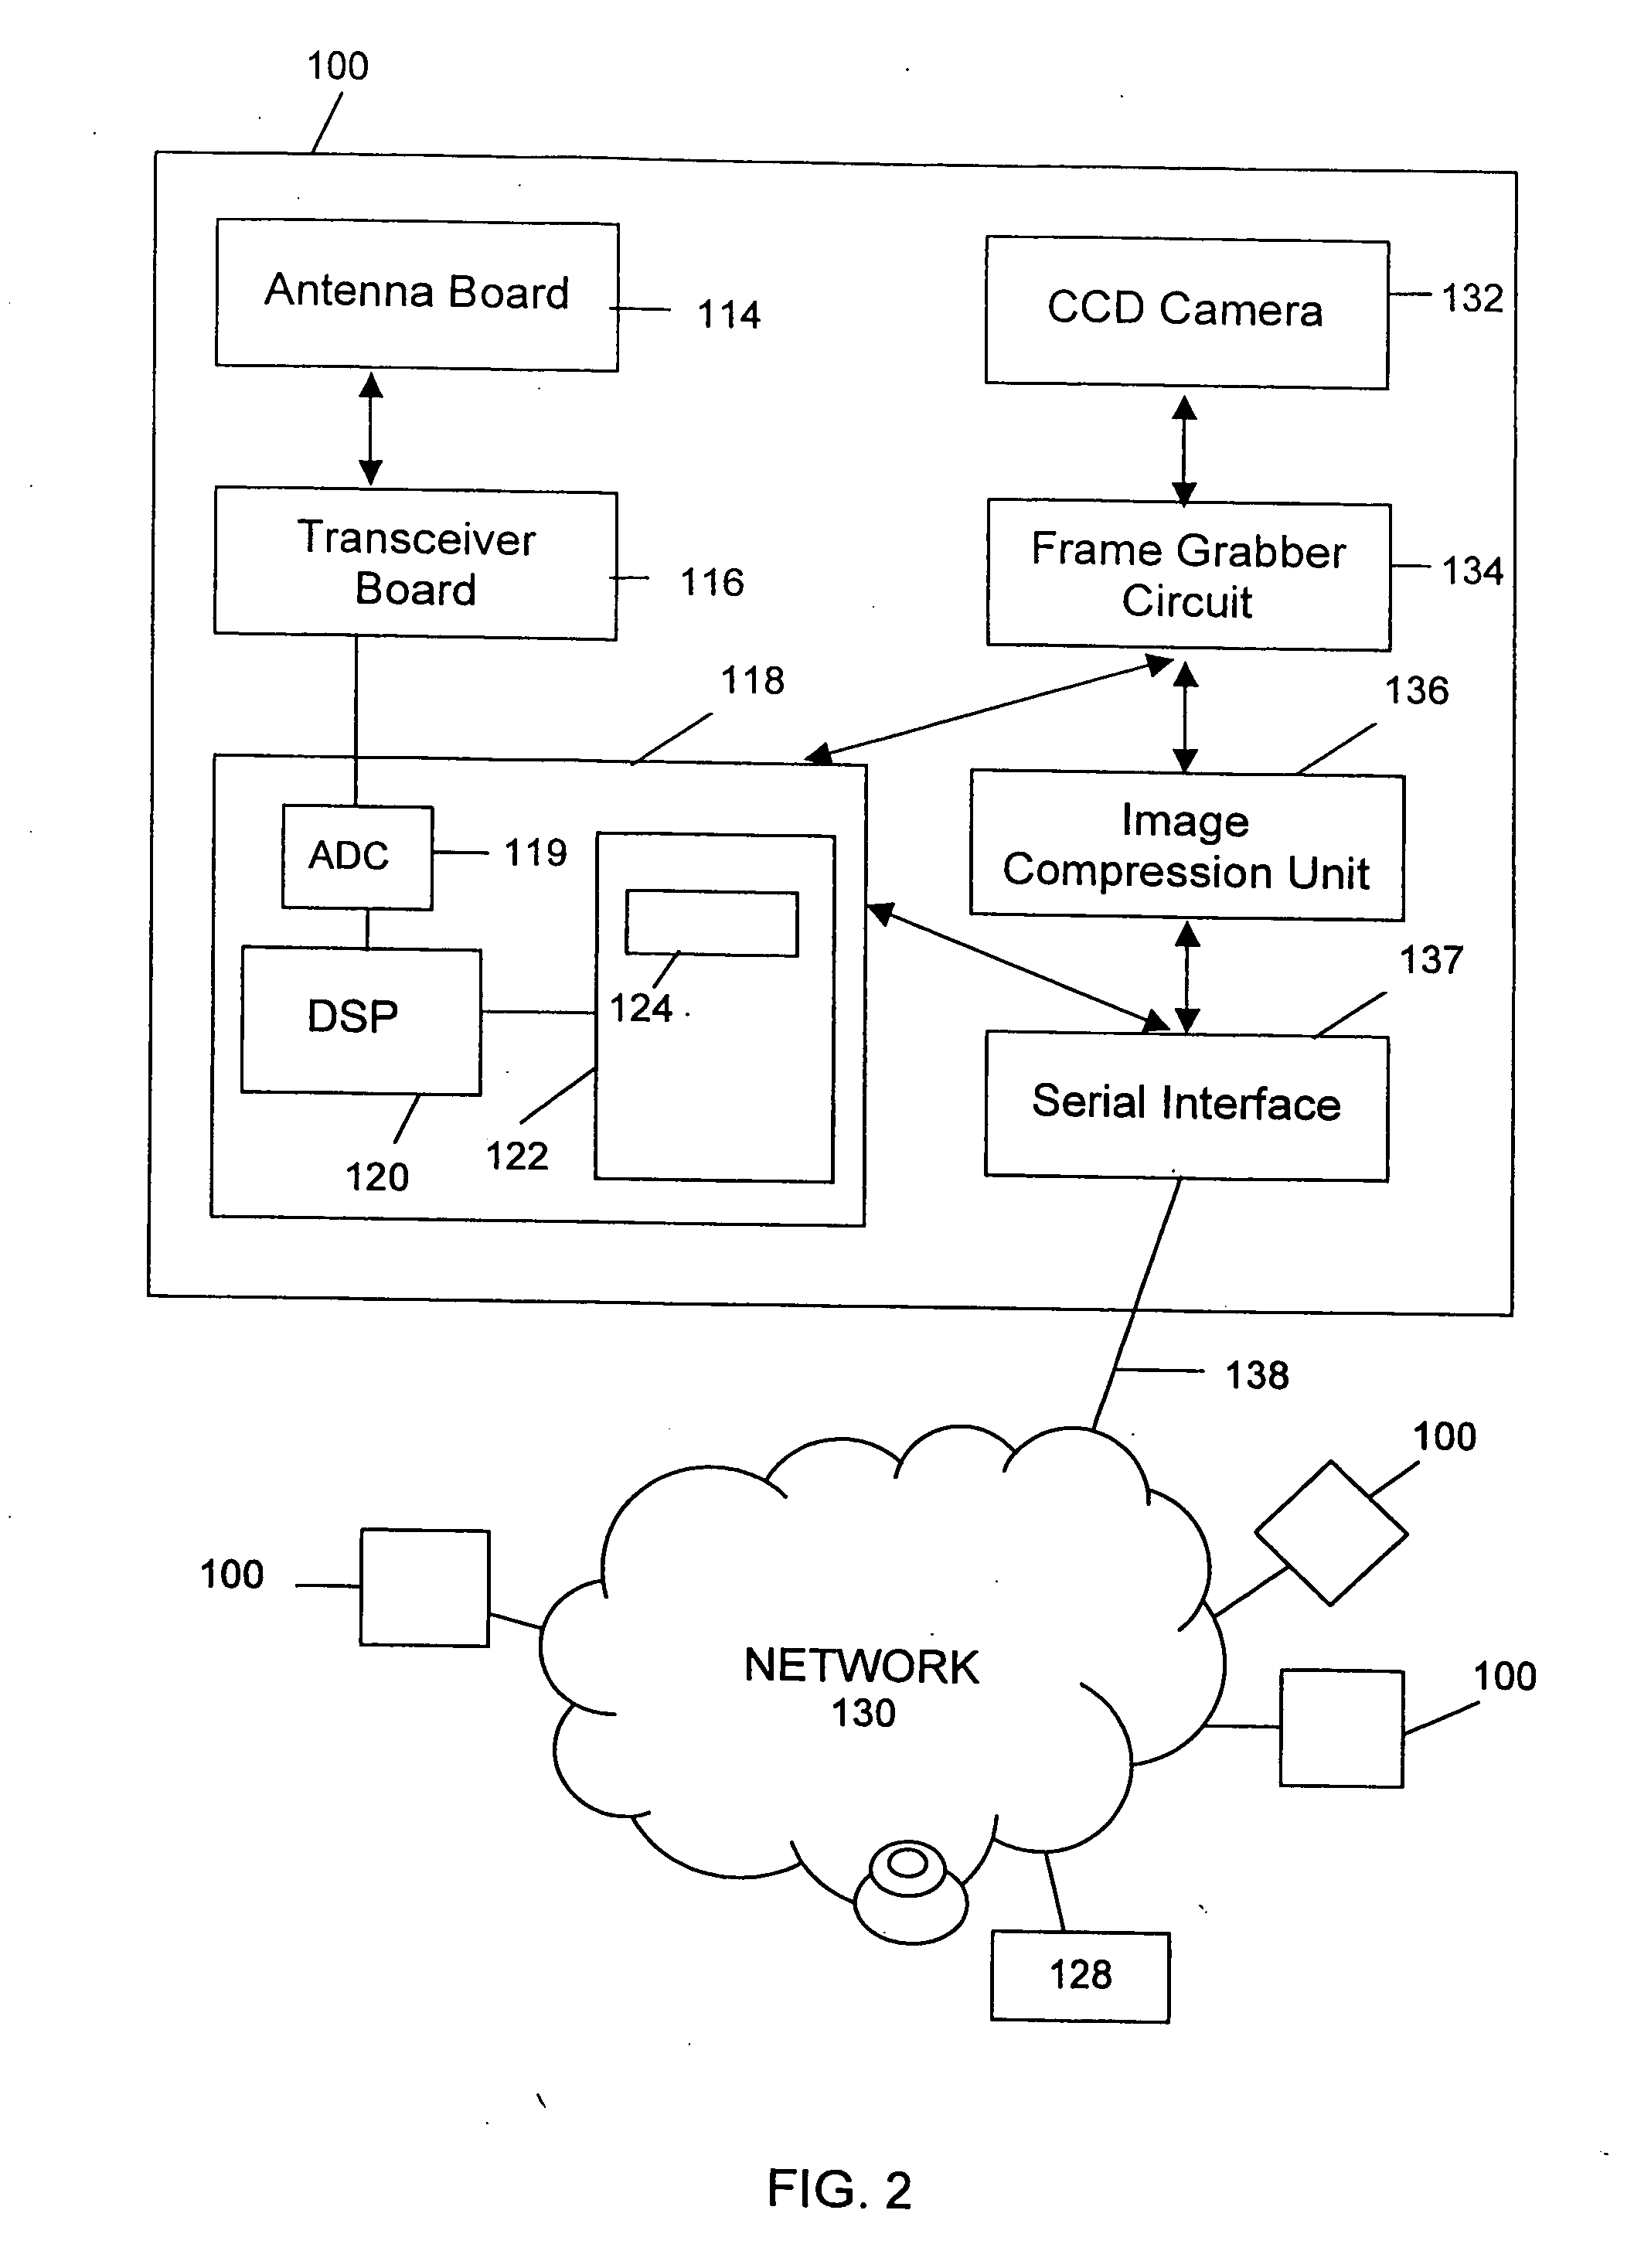 Traffic sensor incorporating a video camera and method of operating same